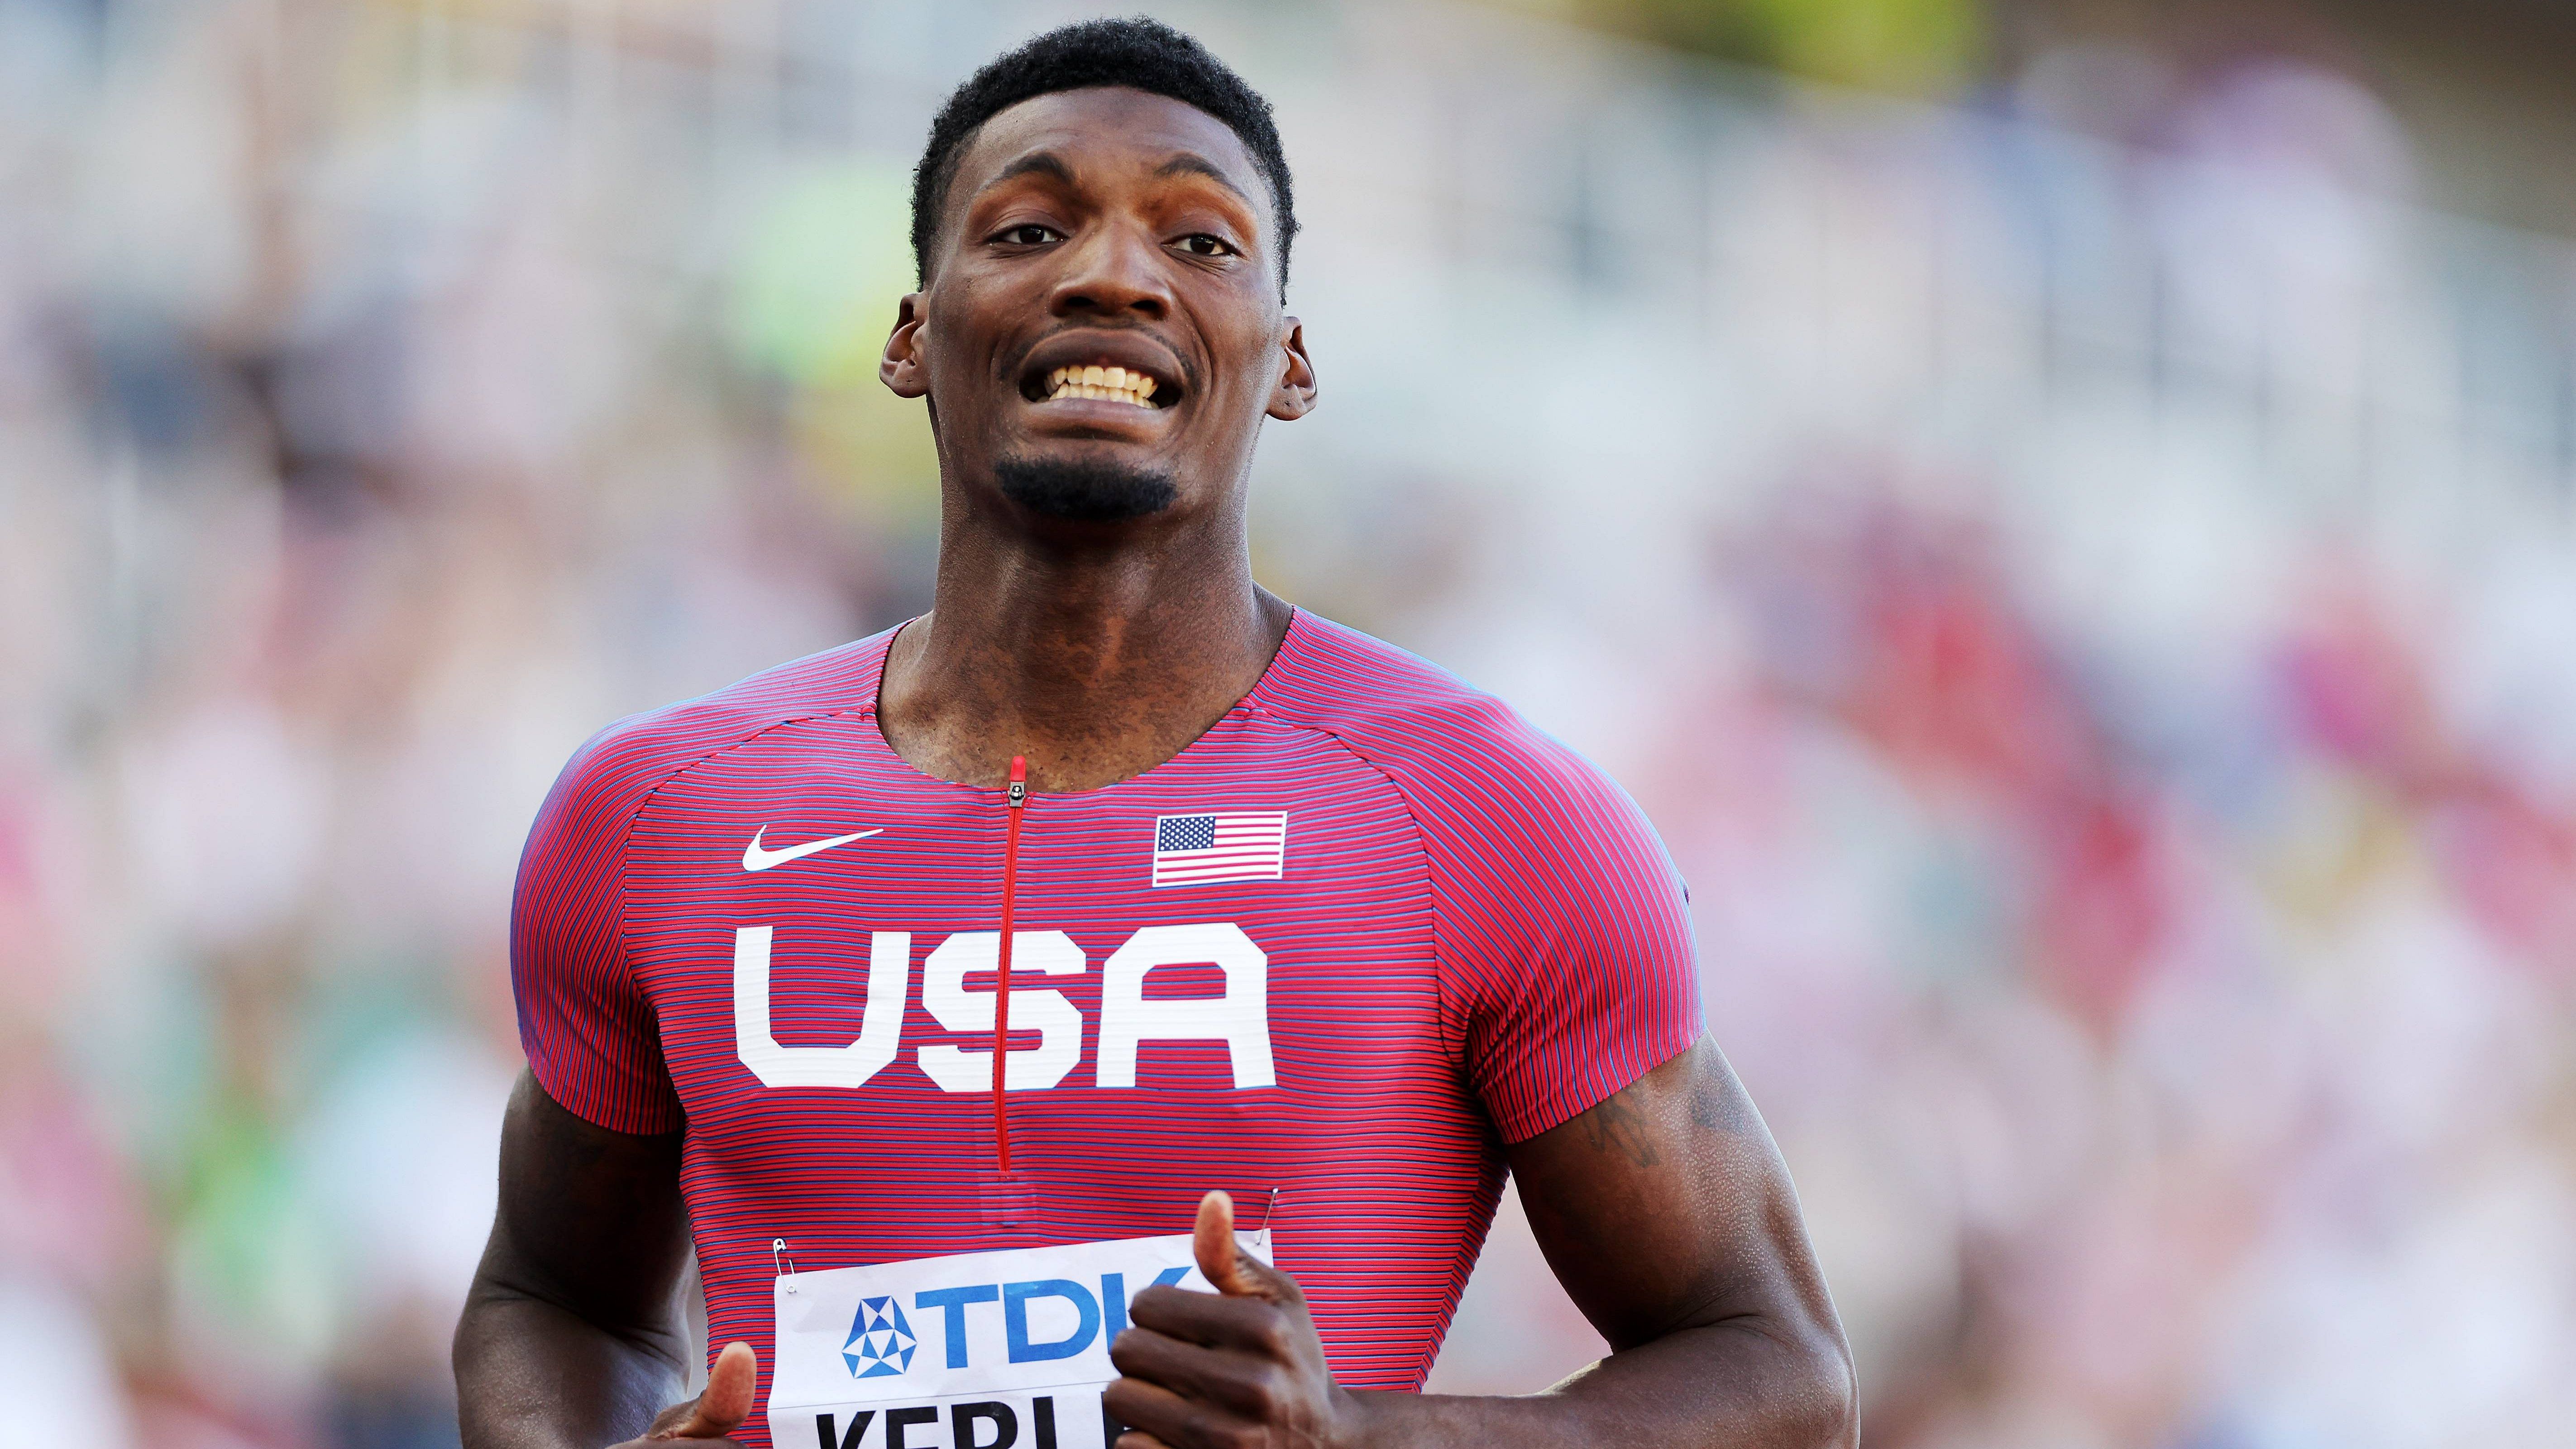 Kerley saw his hopes of a world sprint double go up in smoke Tuesday as he failed to advance from the semi-finals of the 200m, complaining at the time of what he said was a cramp in his thigh. Credit: AFP photo